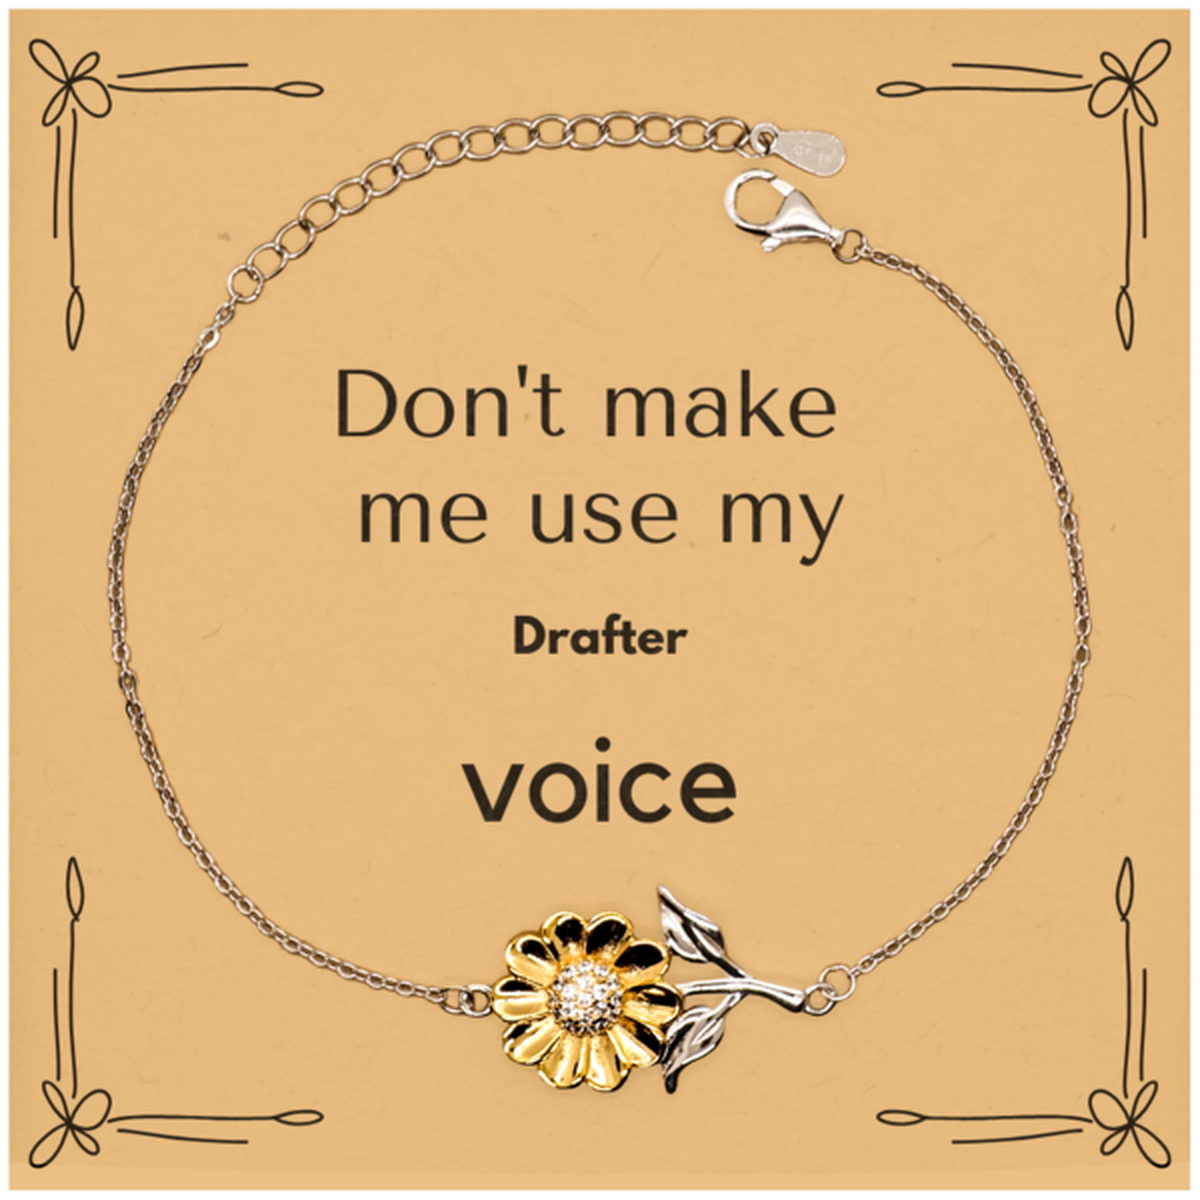 Don't make me use my Drafter voice, Sarcasm Drafter Card Gifts, Christmas Drafter Sunflower Bracelet Birthday Unique Gifts For Drafter Coworkers, Men, Women, Colleague, Friends